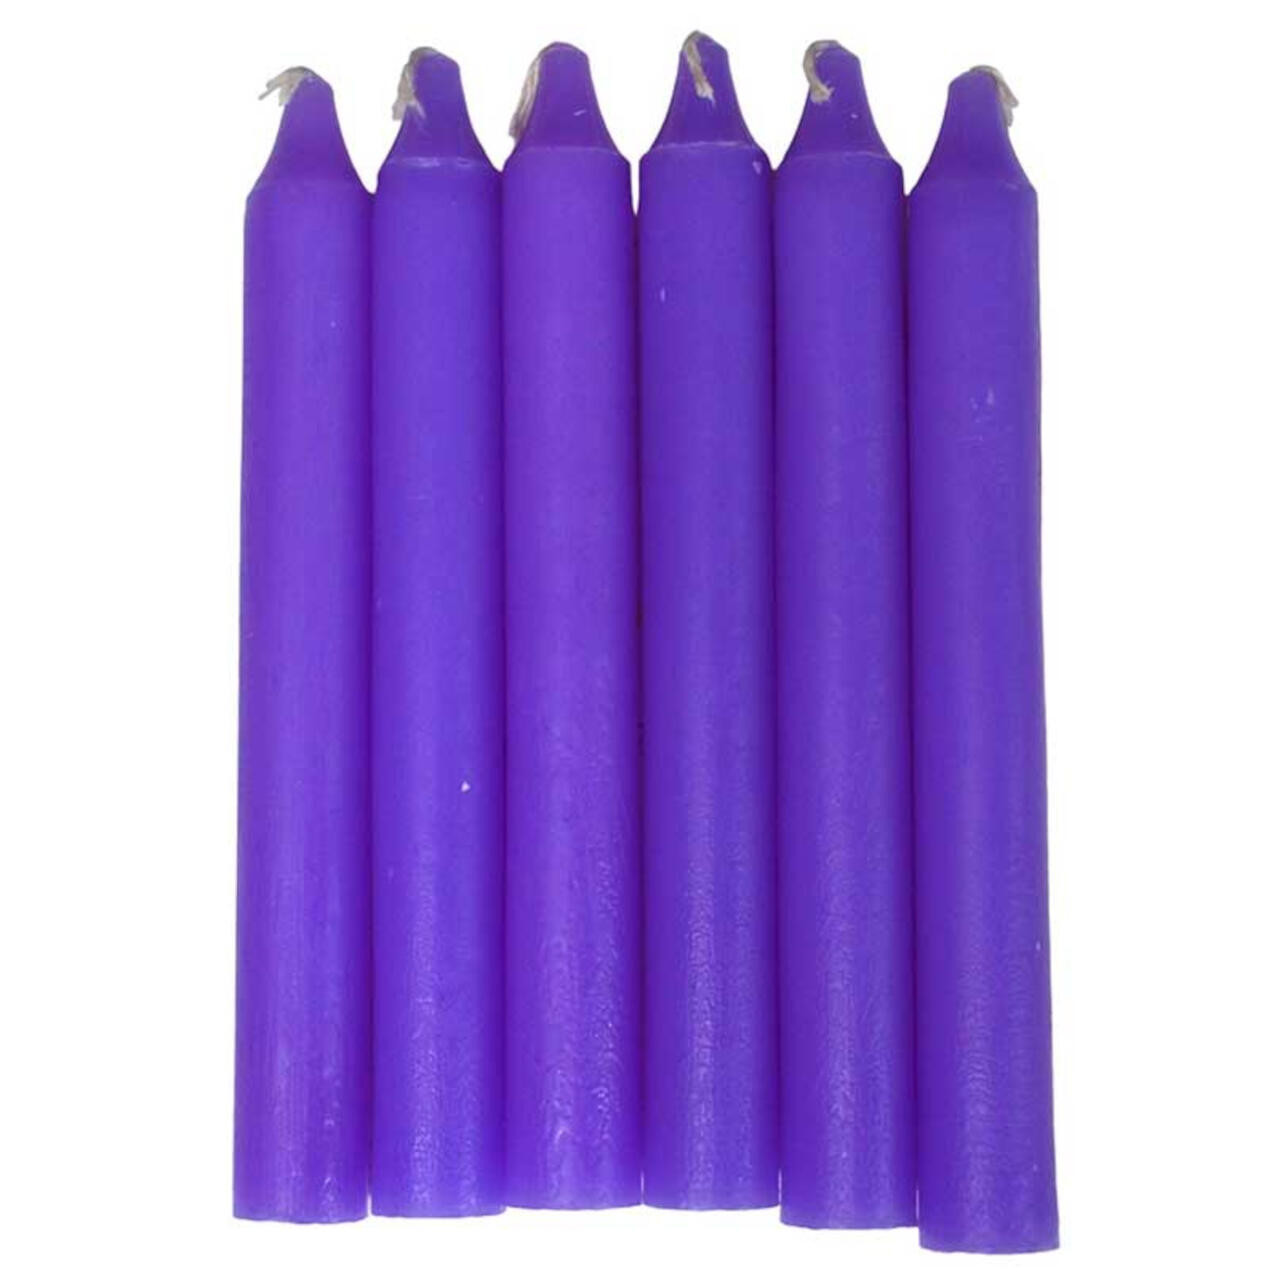 Purple 6" Household Candle (Set Of 6)